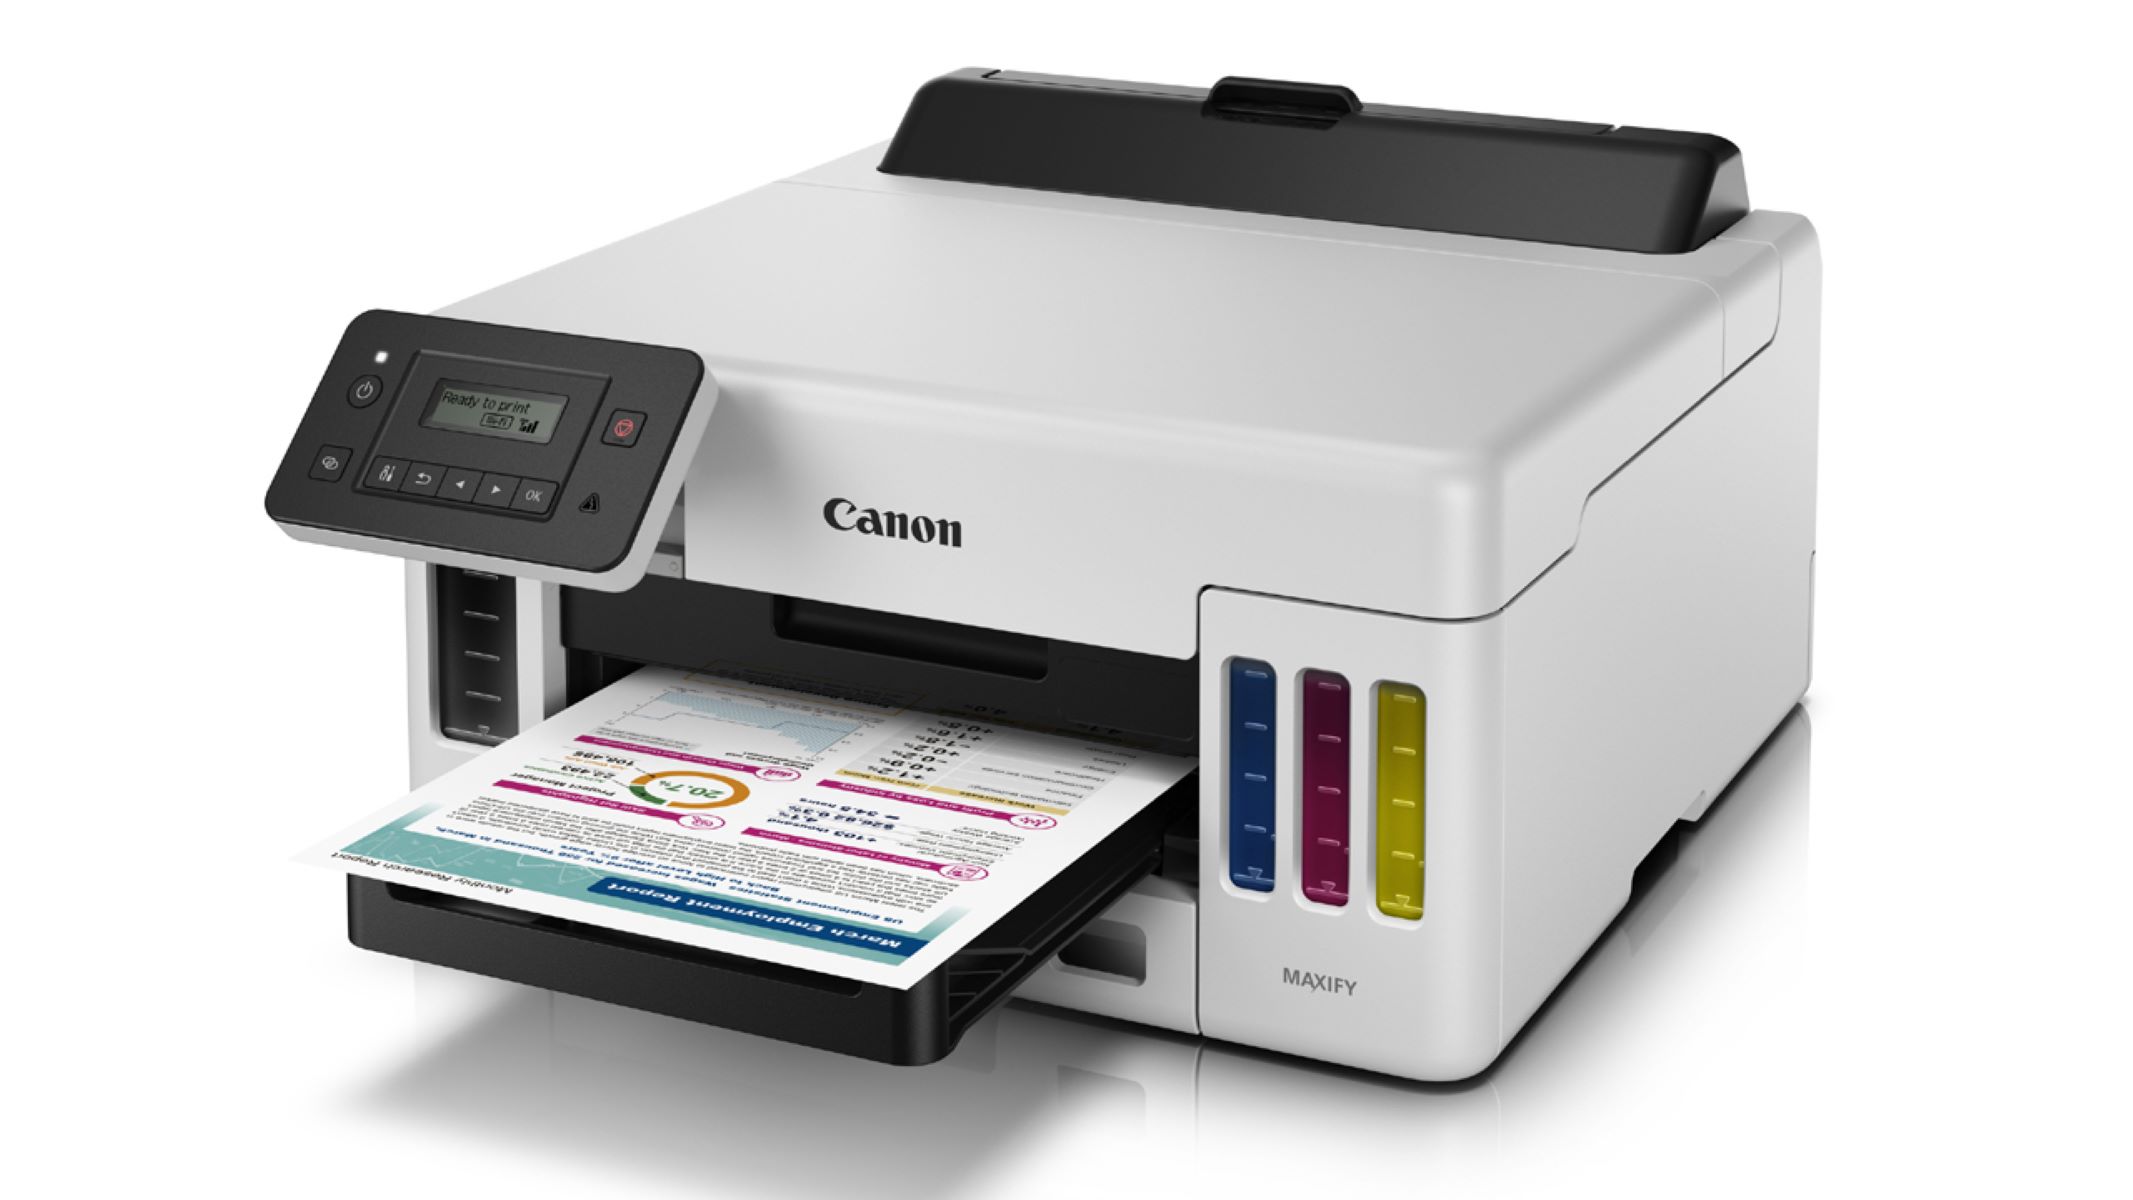 Which Pixma Printer Is The Best?